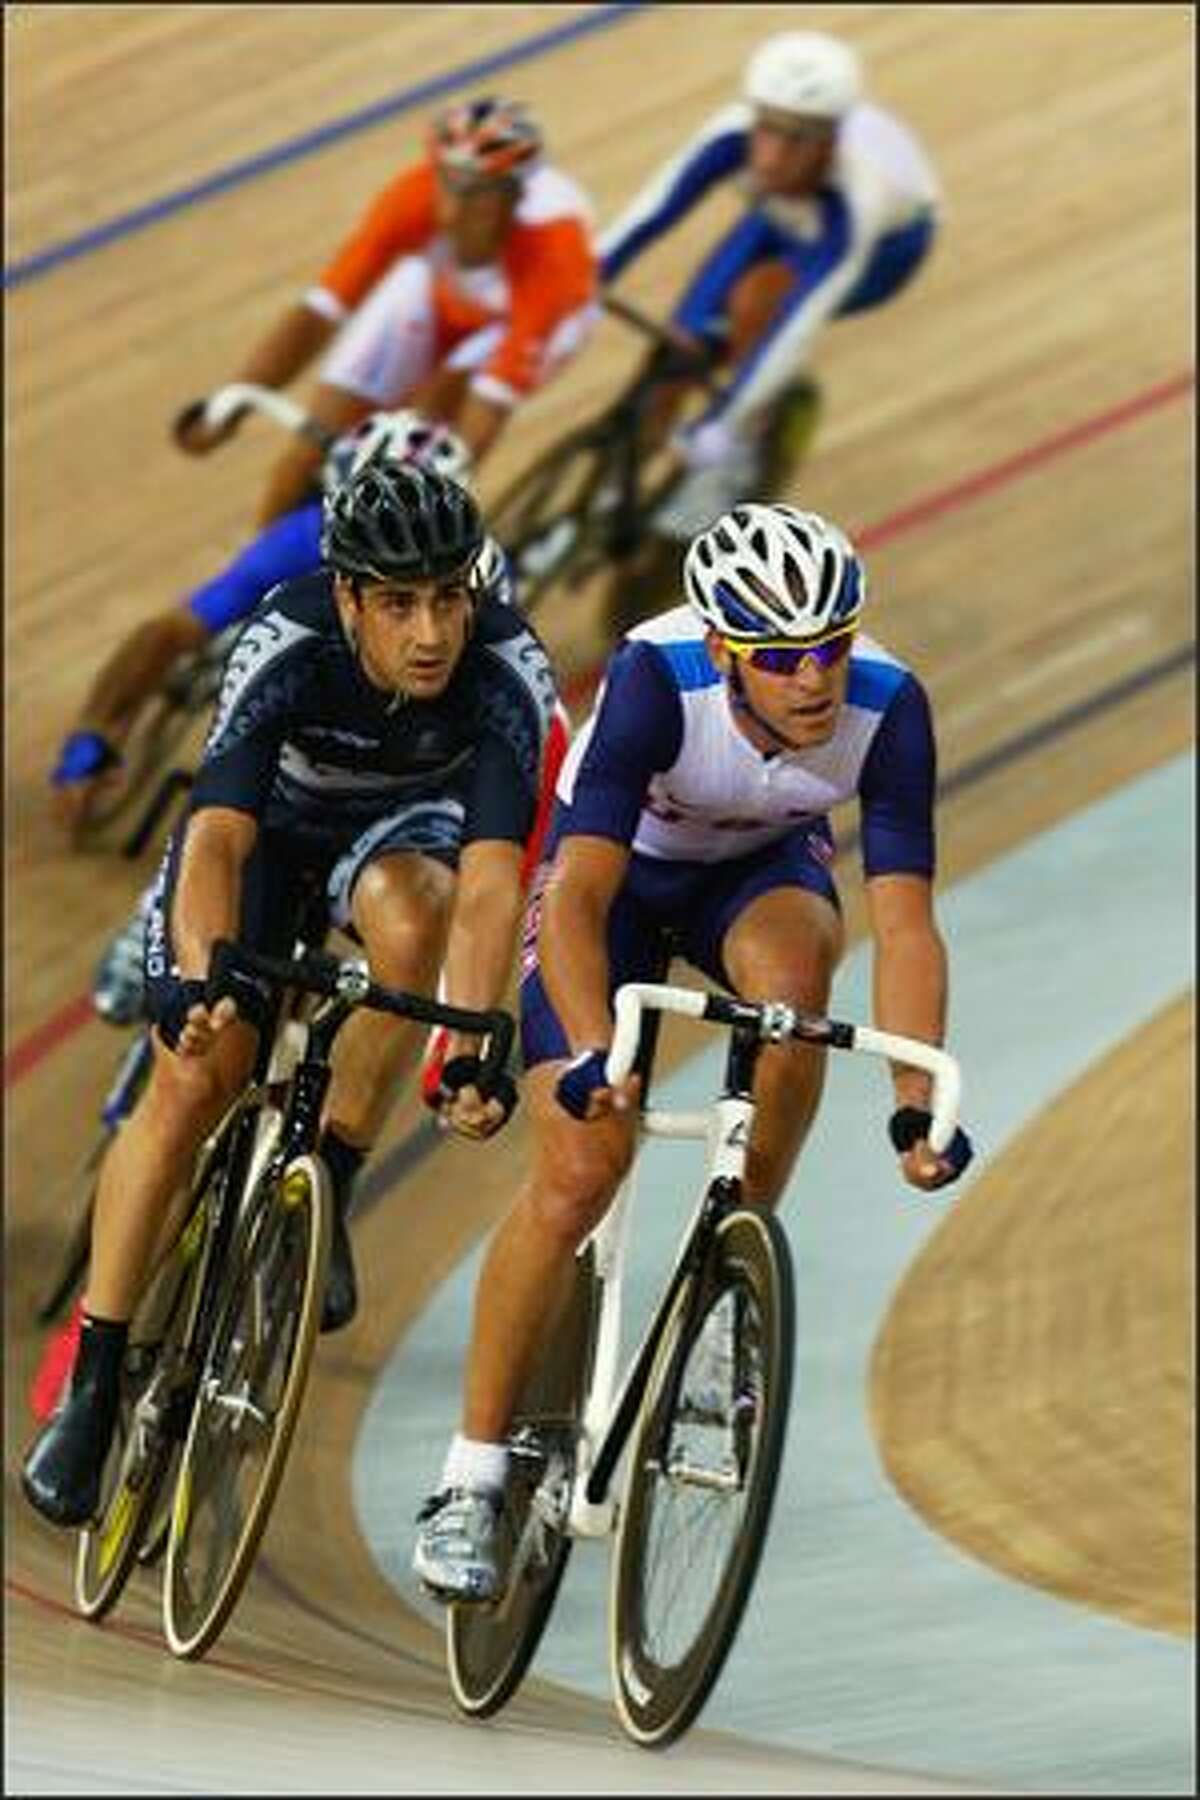 Competitors cycle in the Men's Madison at the Laoshan Velodrome on Day 11 of the Beijing 2008 Olympic Games on Tuesday.